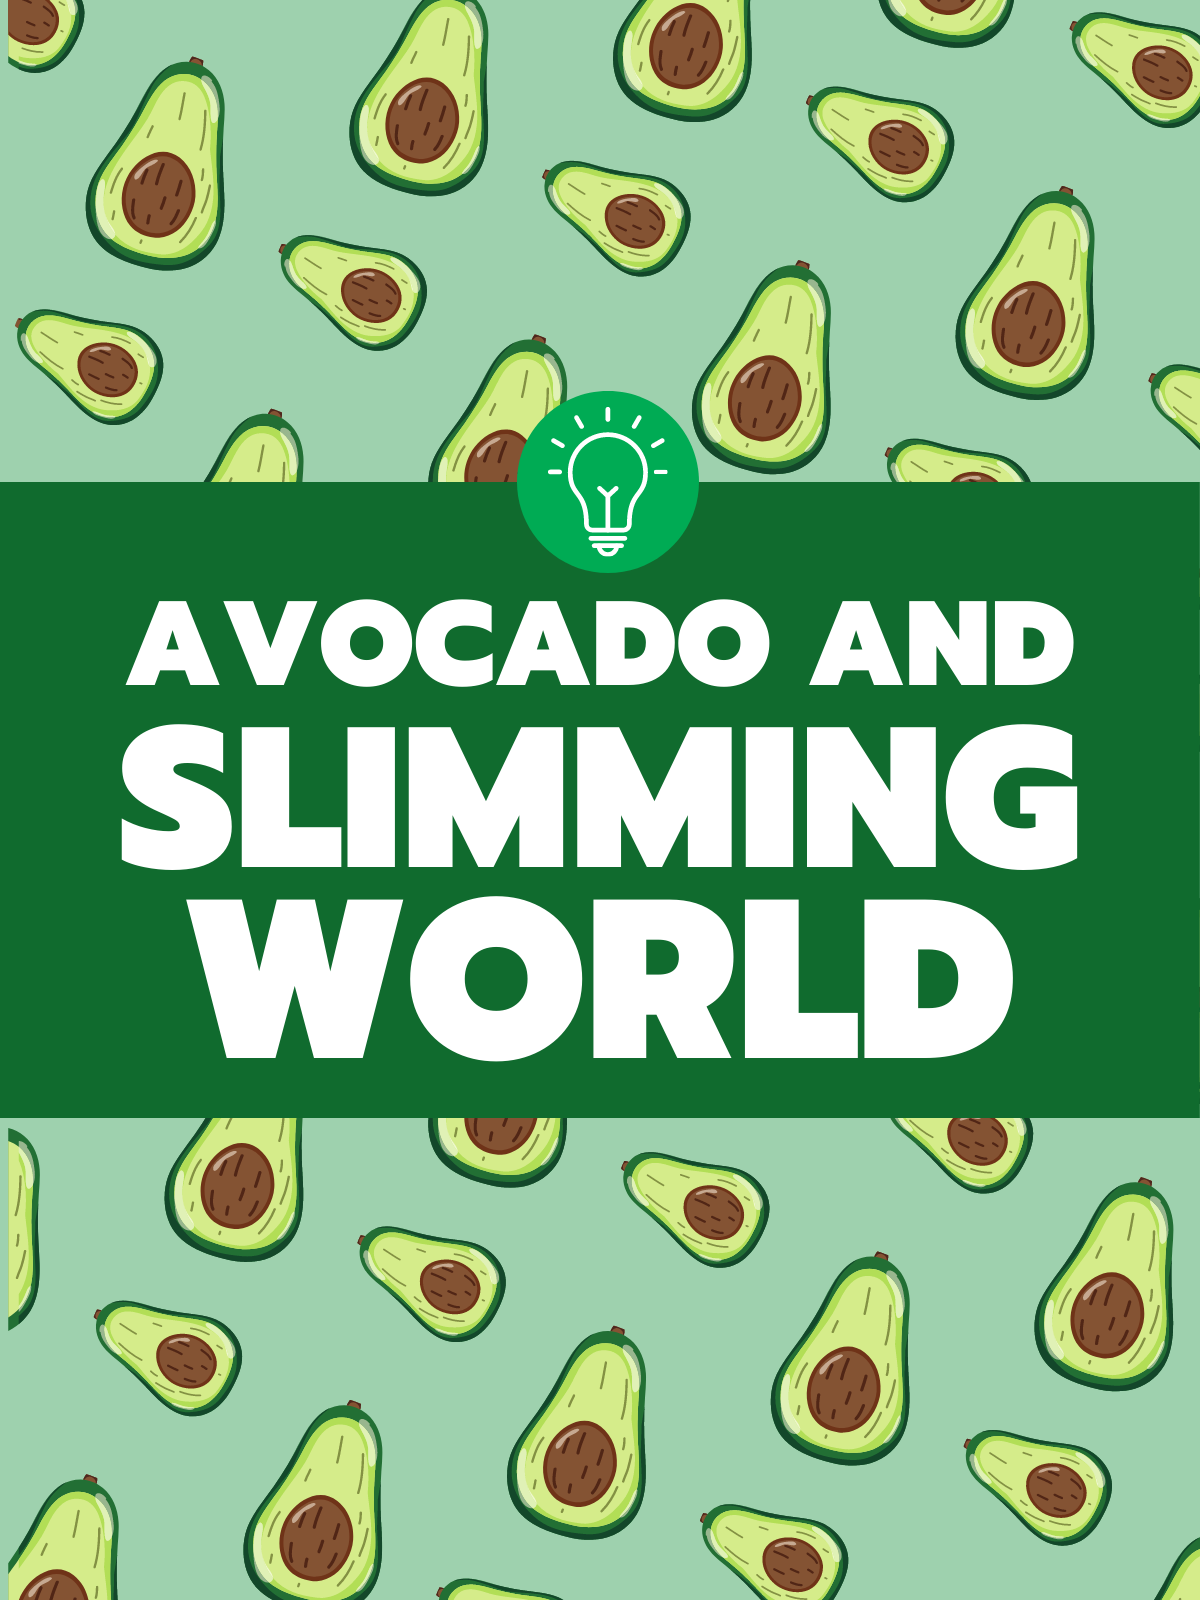 avocado on slimming world featured image